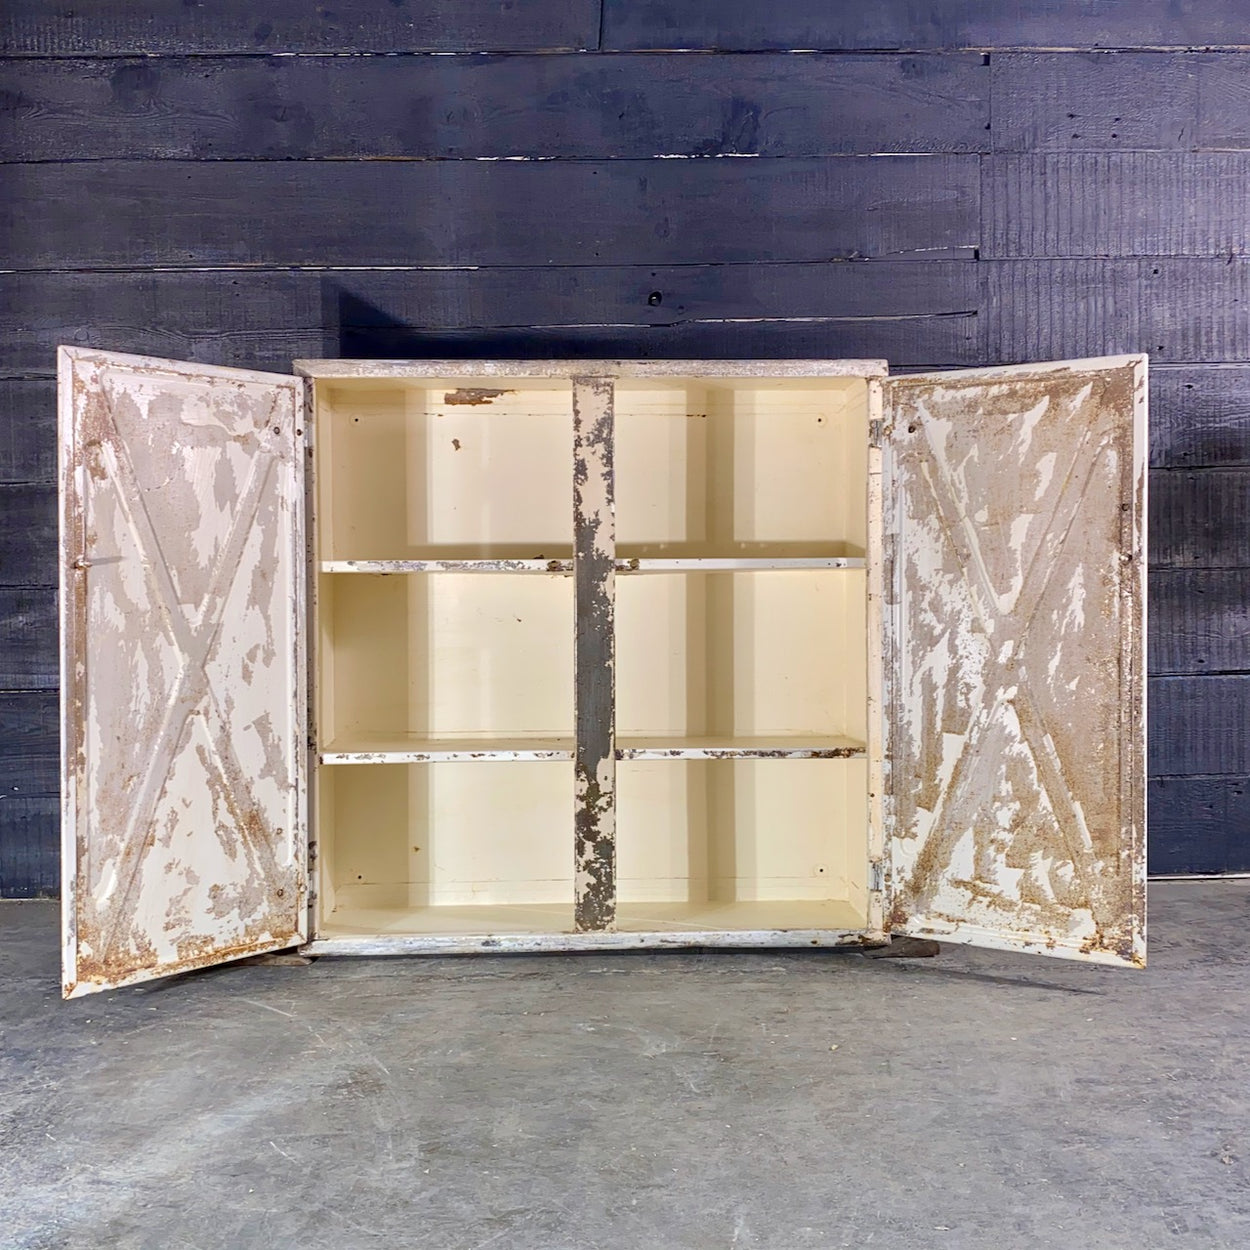 Industrial White Painted Steel Factory Cabinet